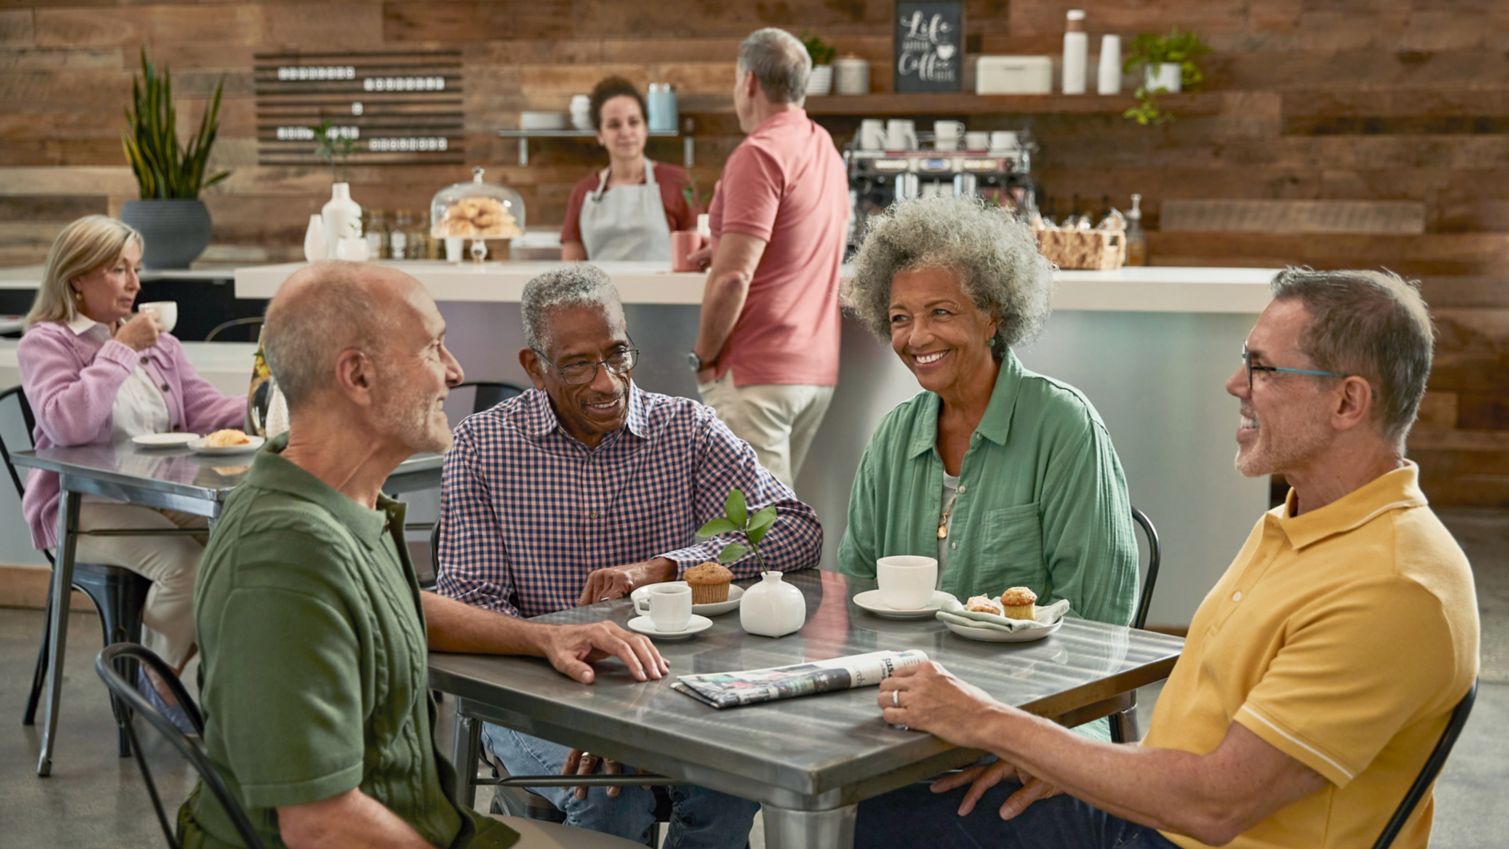 A group of friends chat at a table in a coffee shop.